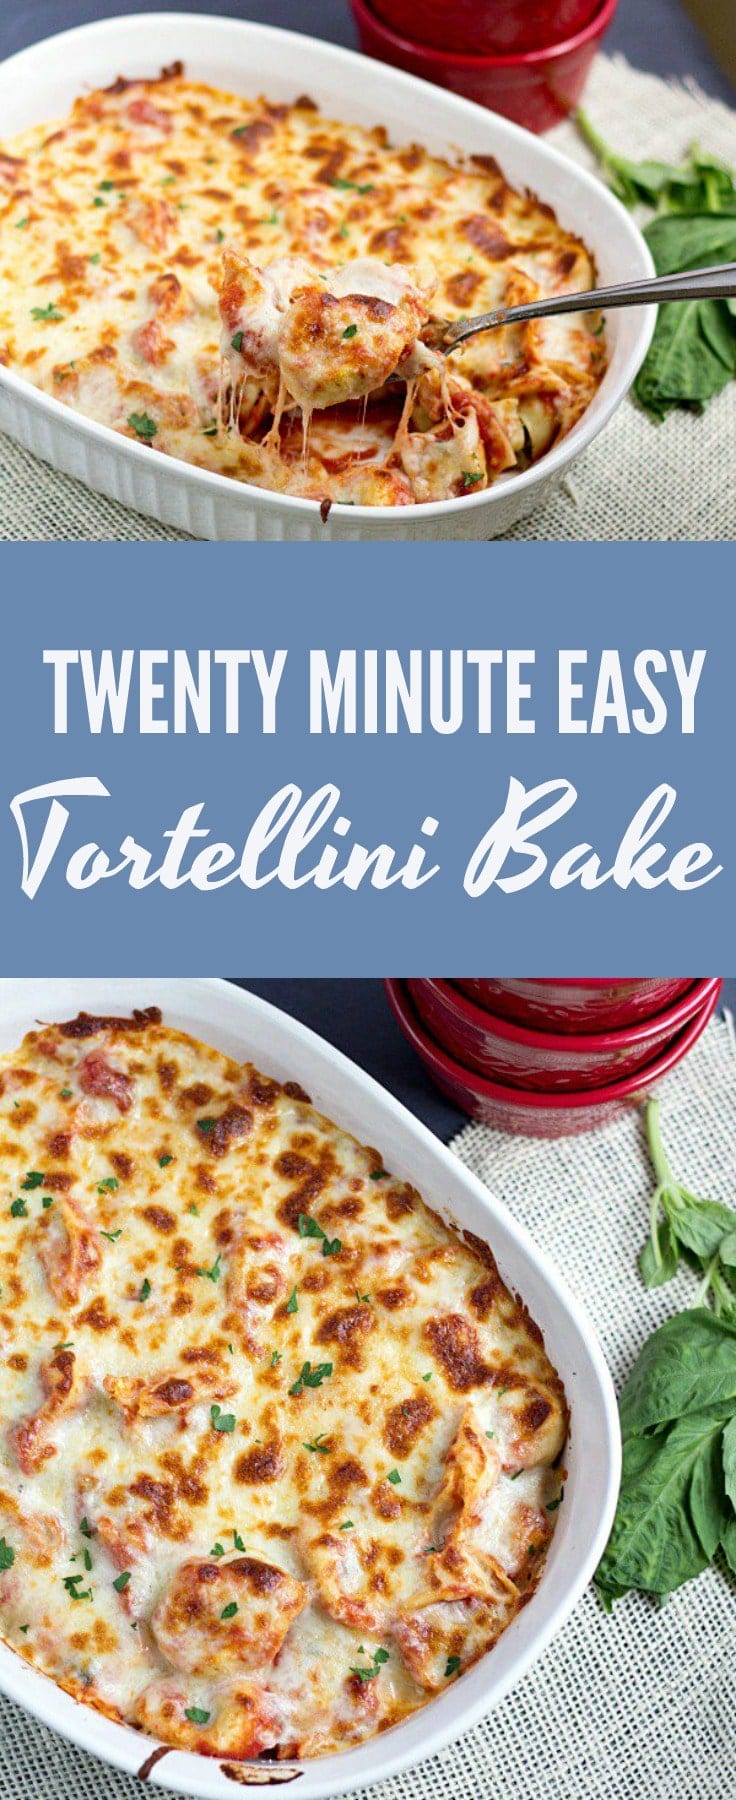 Twenty Minute Easy Tortellini Bake is a perfect weeknight dinner recipe. You'll have minimal cleanup and a delicious, cheesy dinner that everyone will love! #pasta #tortellini #dinner #recipe #cheese